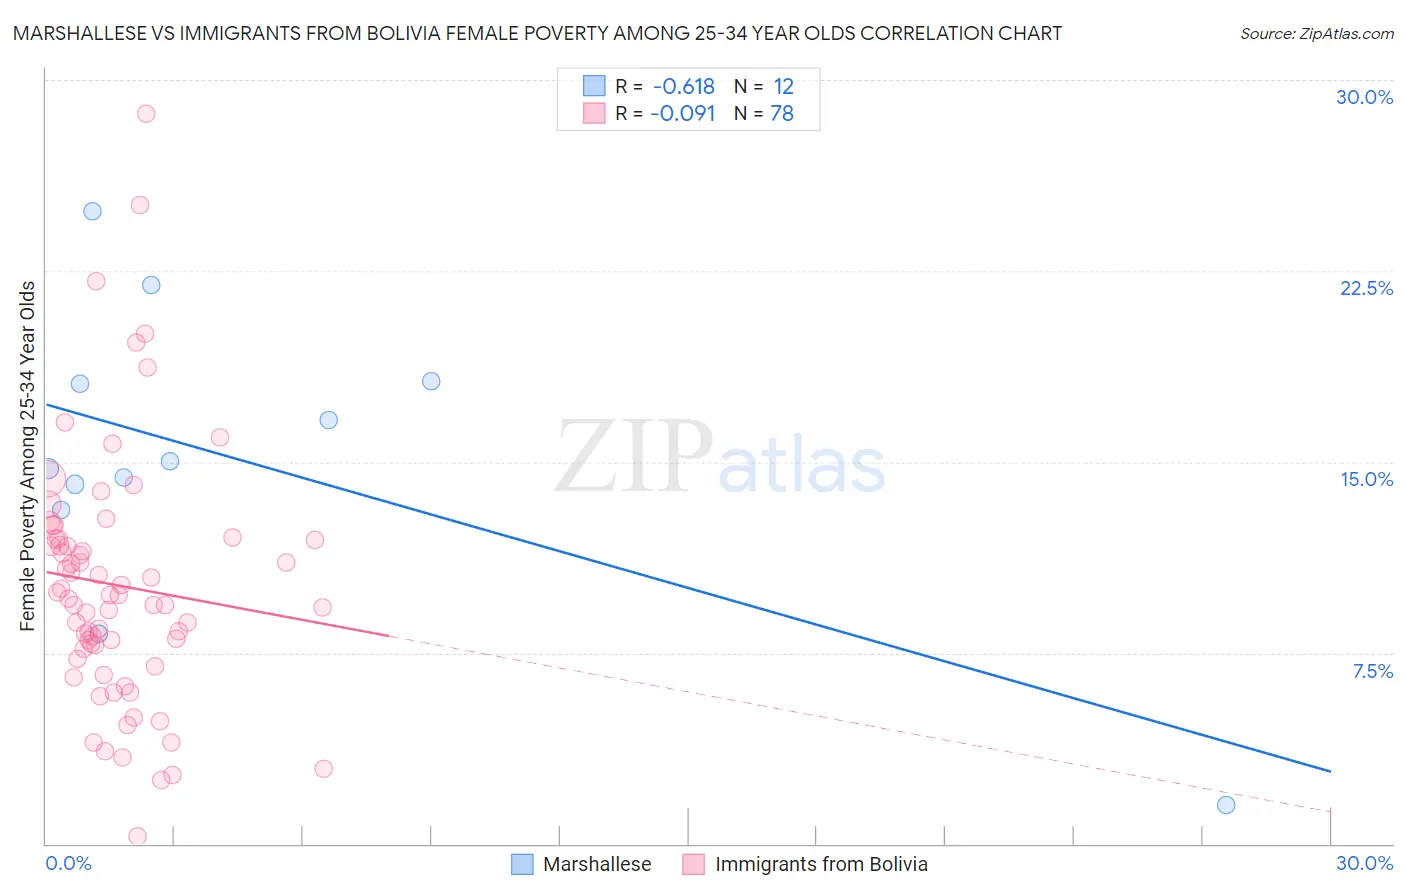 Marshallese vs Immigrants from Bolivia Female Poverty Among 25-34 Year Olds